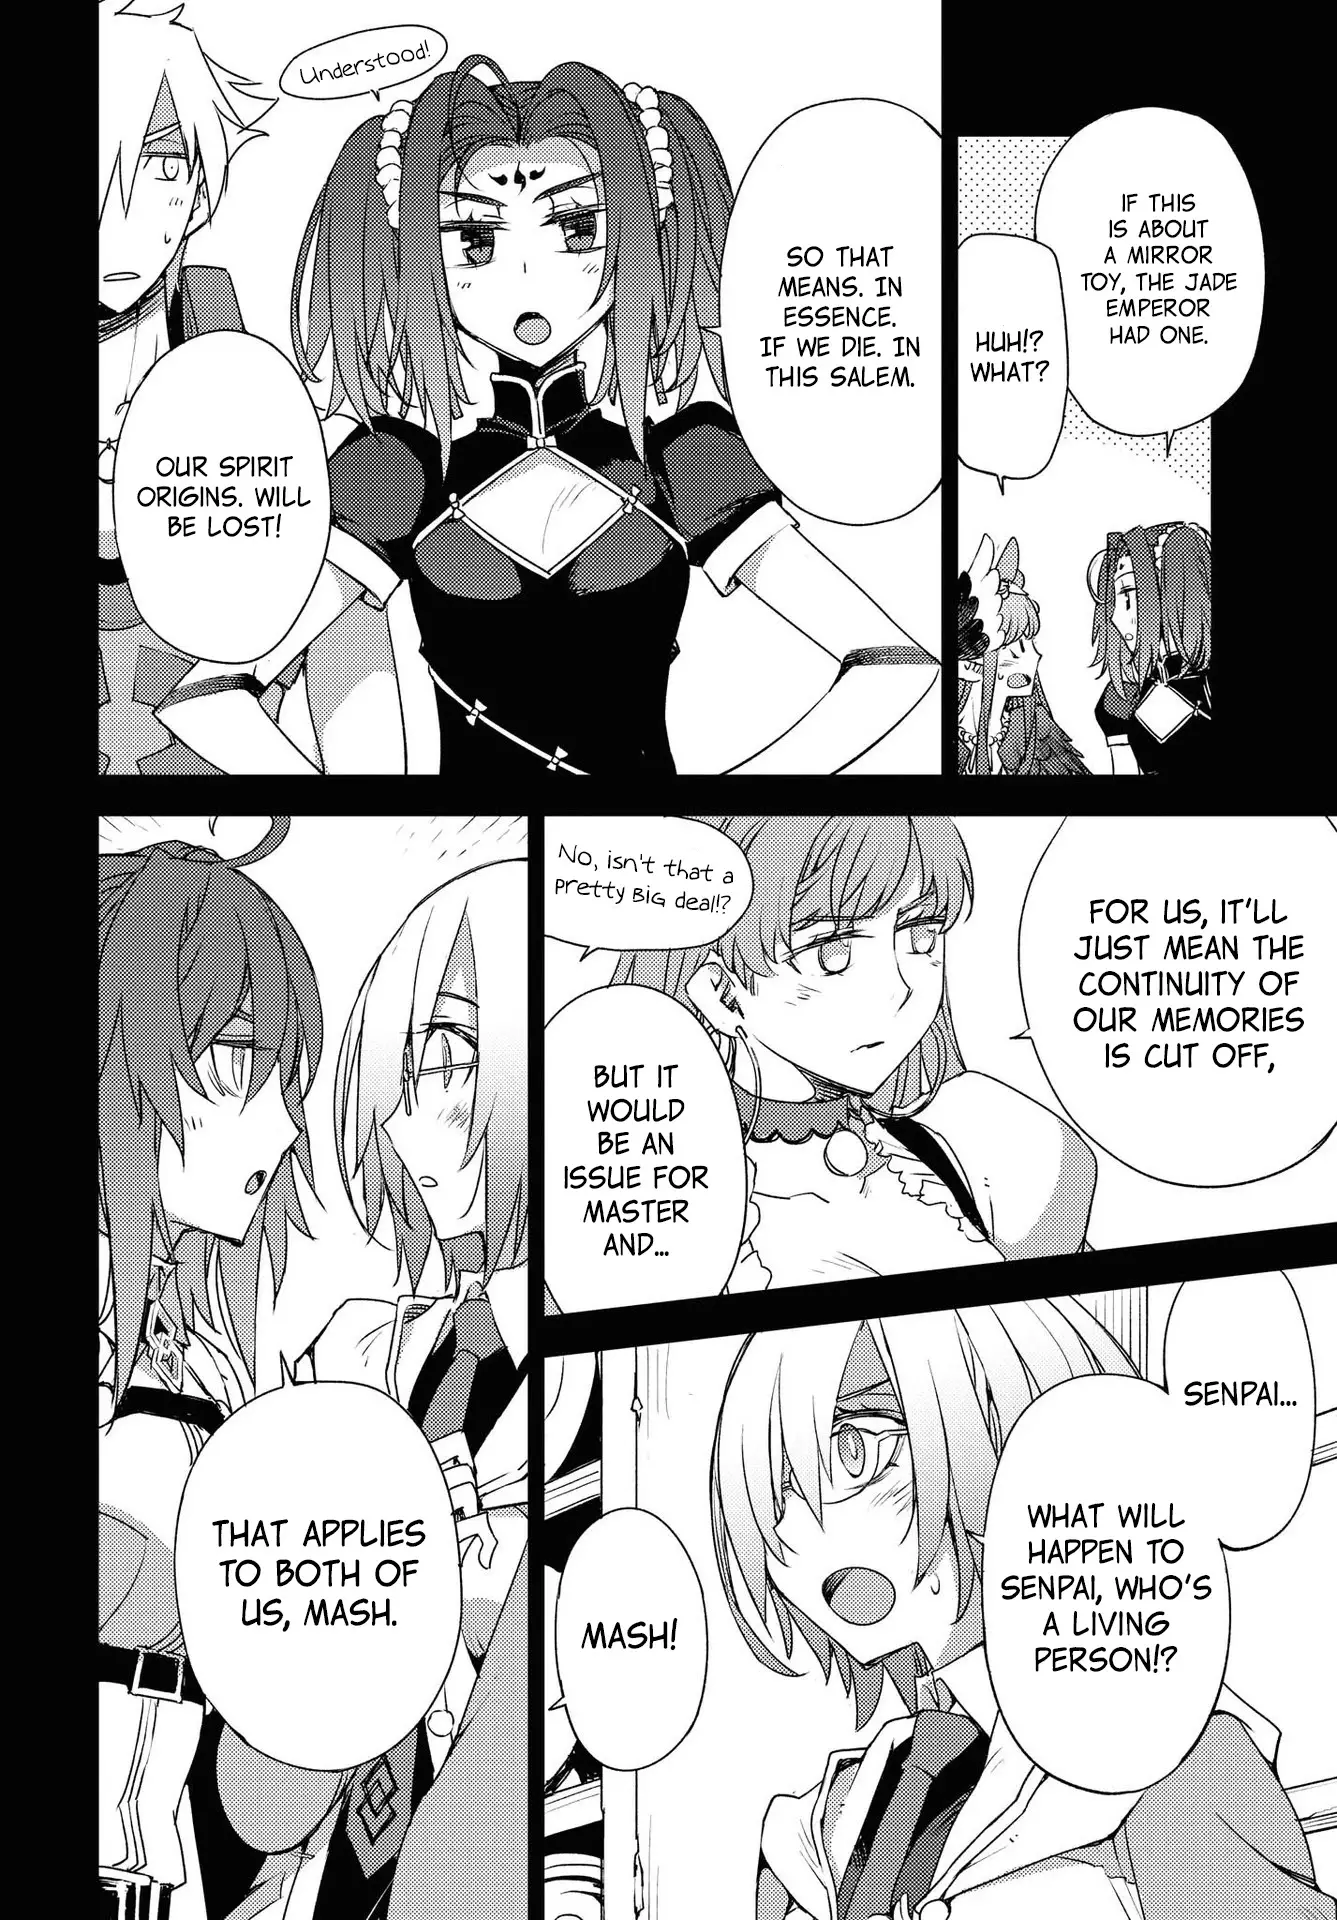 Fate/grand Order: Epic Of Remnant - Subspecies Singularity Iv: Taboo Advent Salem: Salem Of Heresy - 21 page 22-ac5465aa